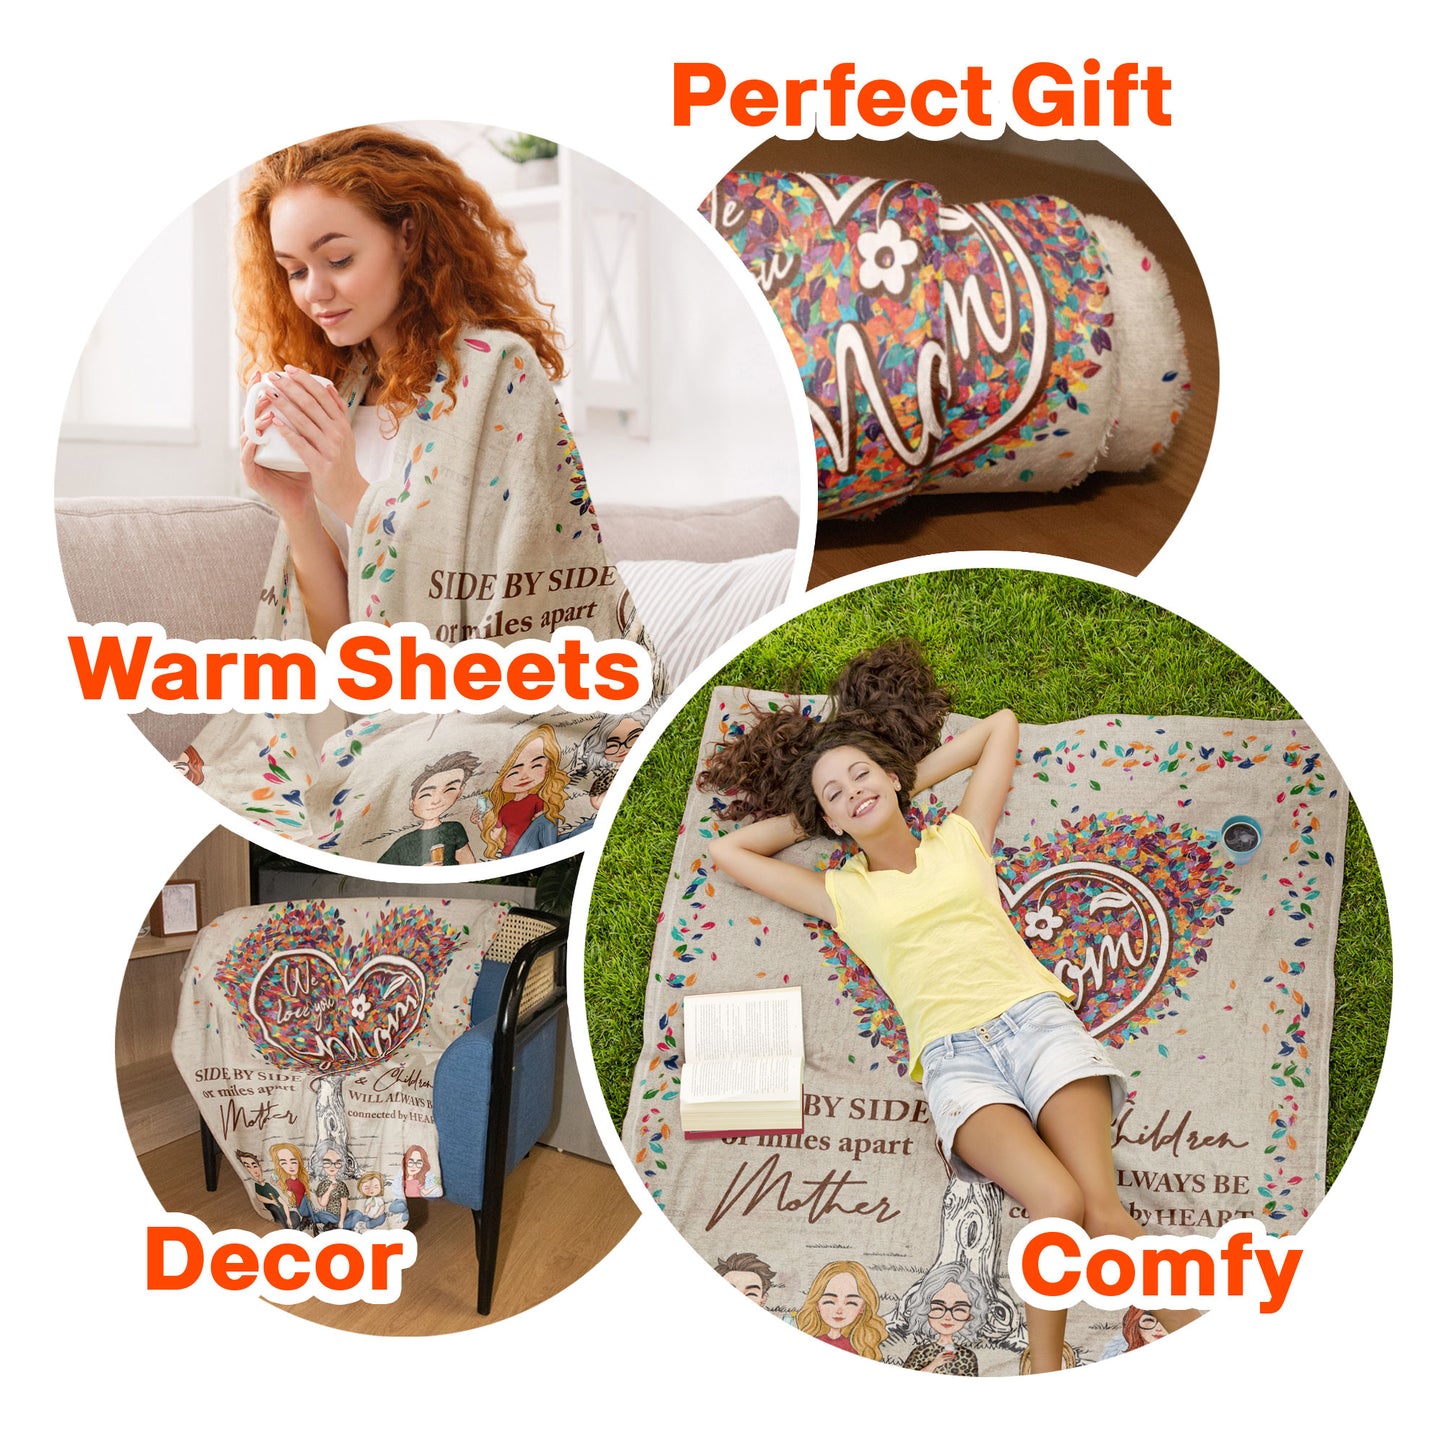 Mother And Children Will Always Be Connected - Personalized Blanket